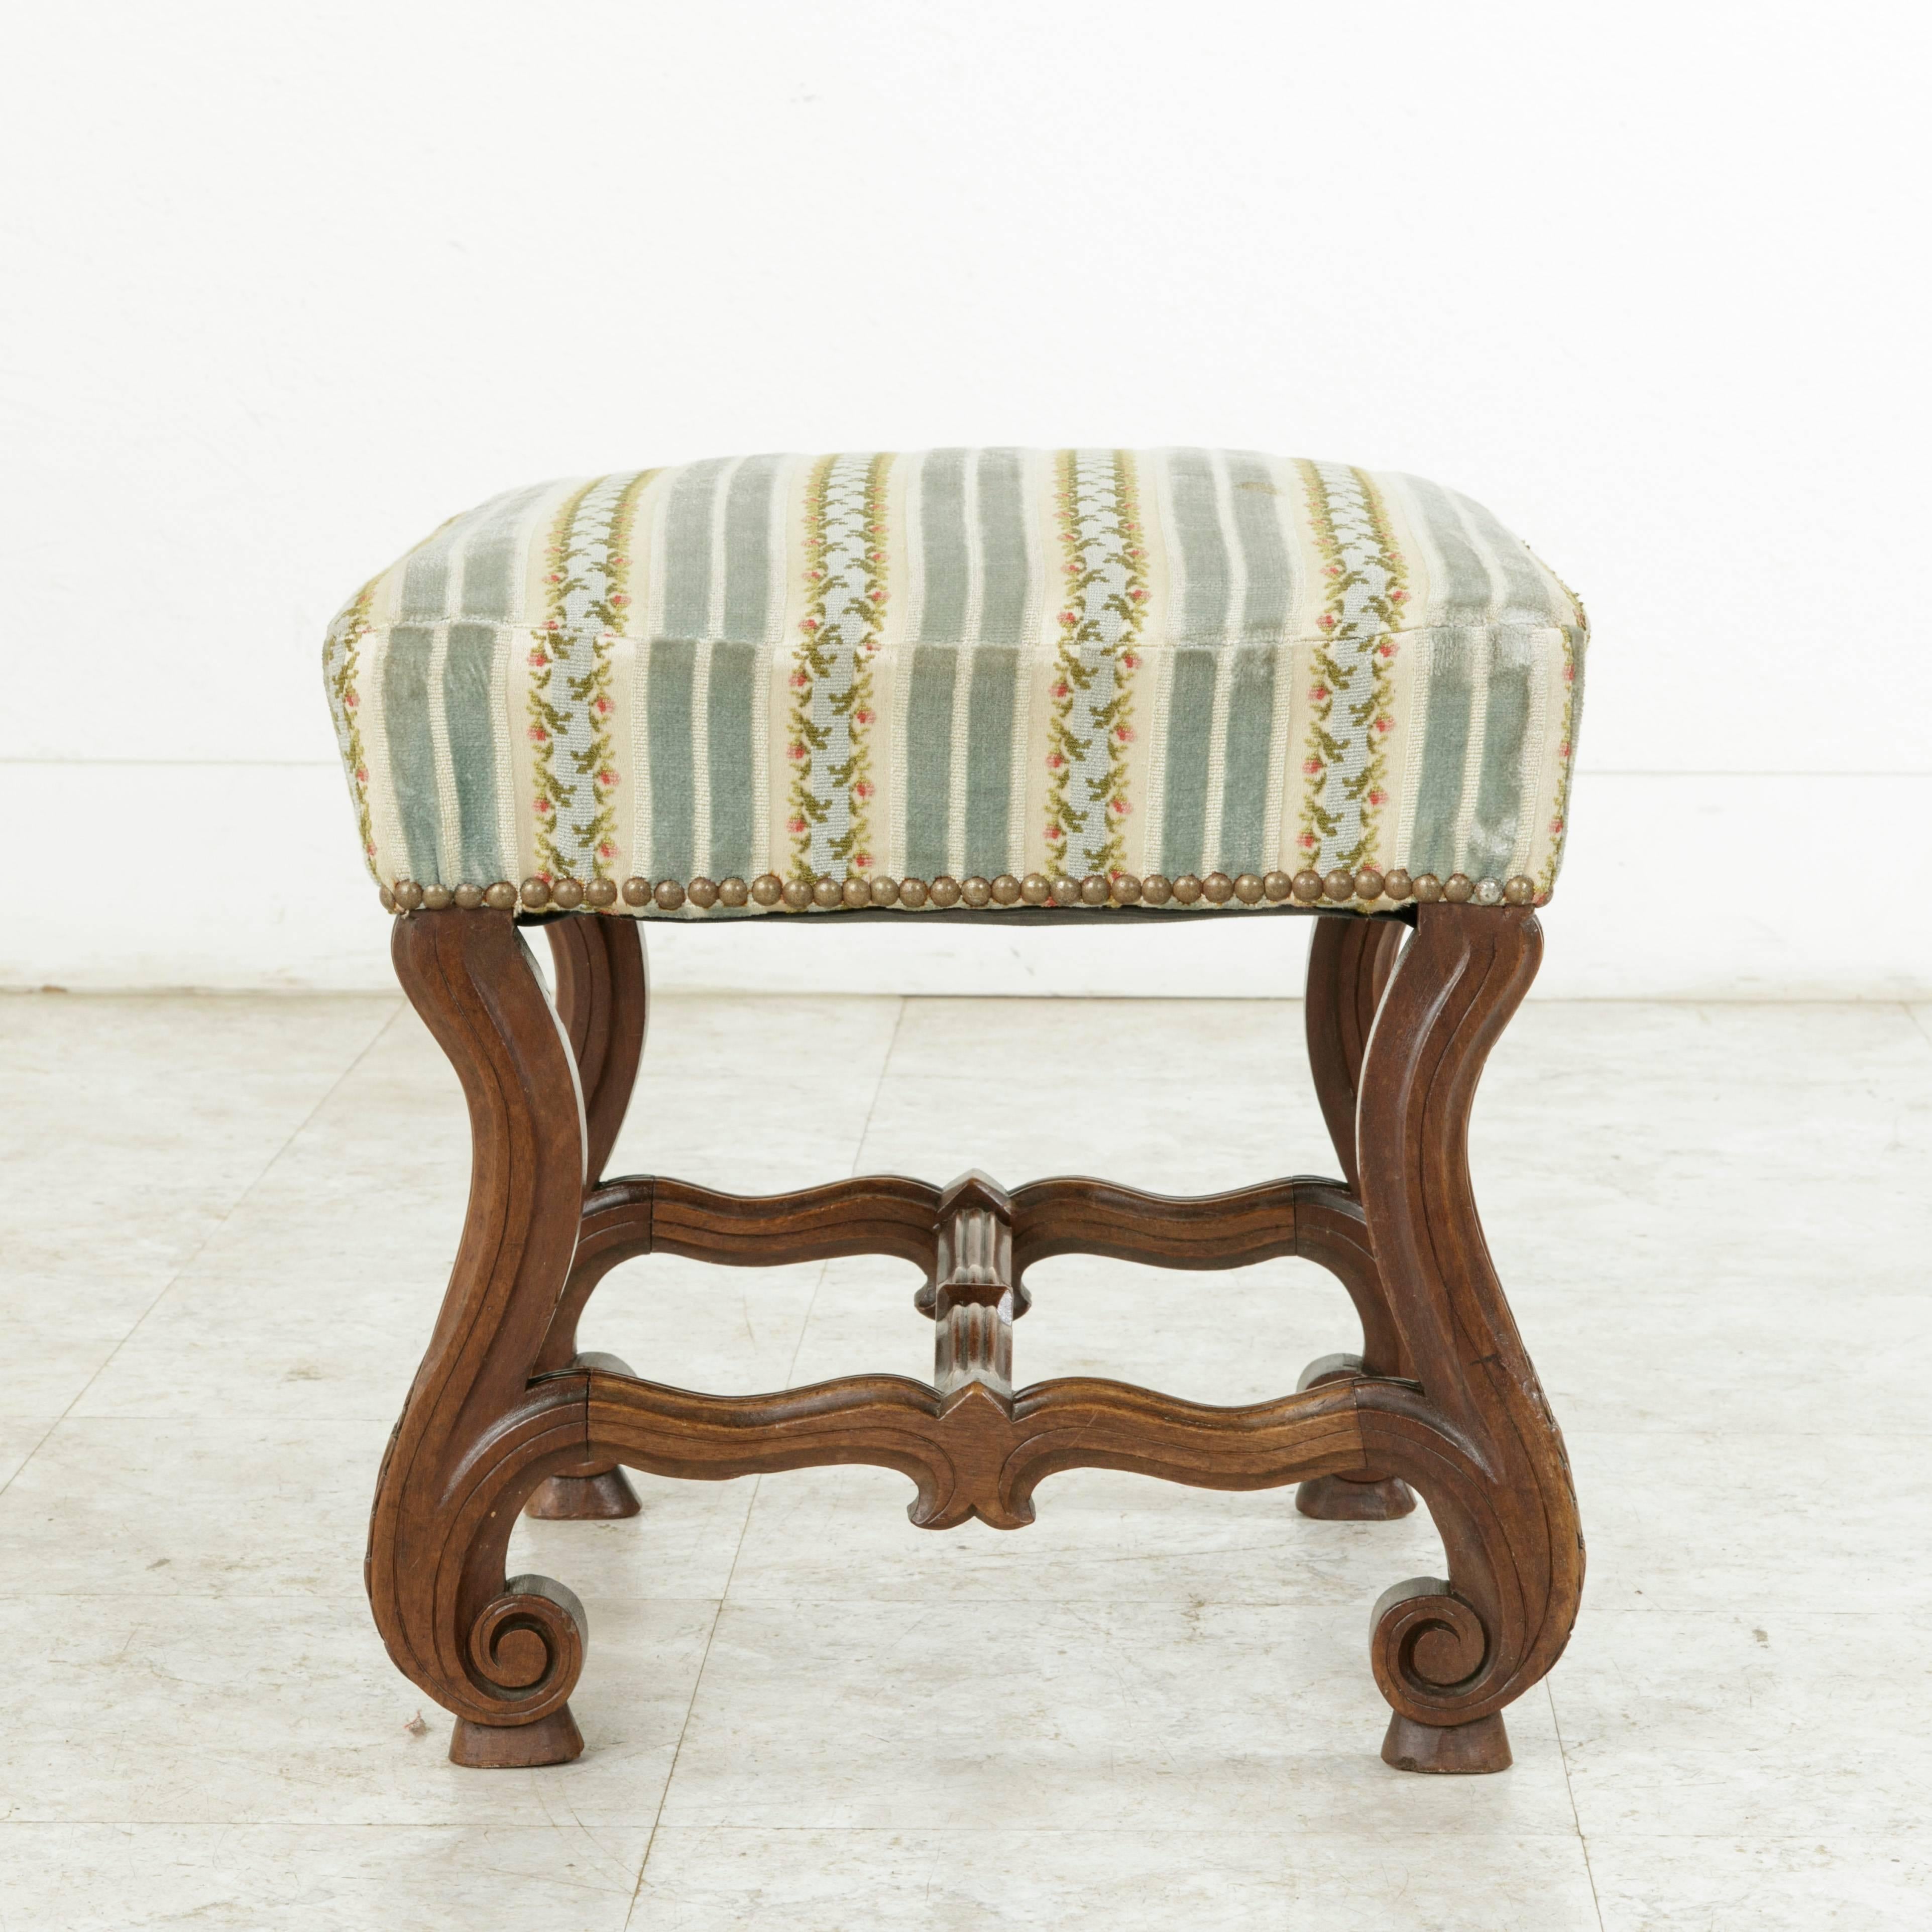 Late 19th Century French Louis XIV Style Hand-Carved Walnut Vanity Bench, Stool 2